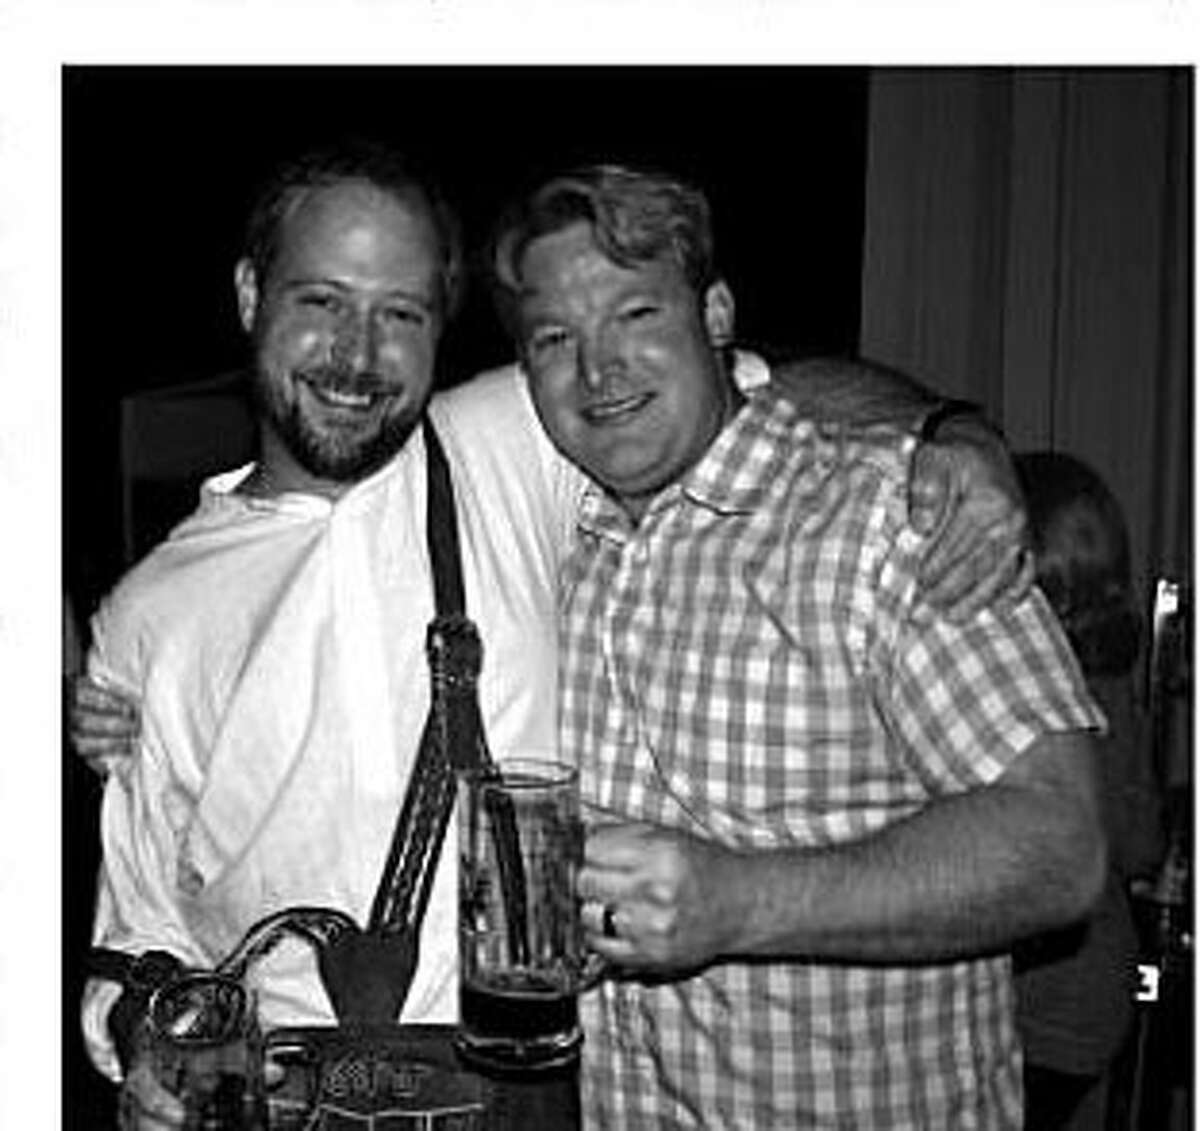 Ash Rowell (right, with Dave Fougeron) was shot to death on Friday night in Houston. (Photo from the book "Houston Beer" by Ronnie Crocker.)